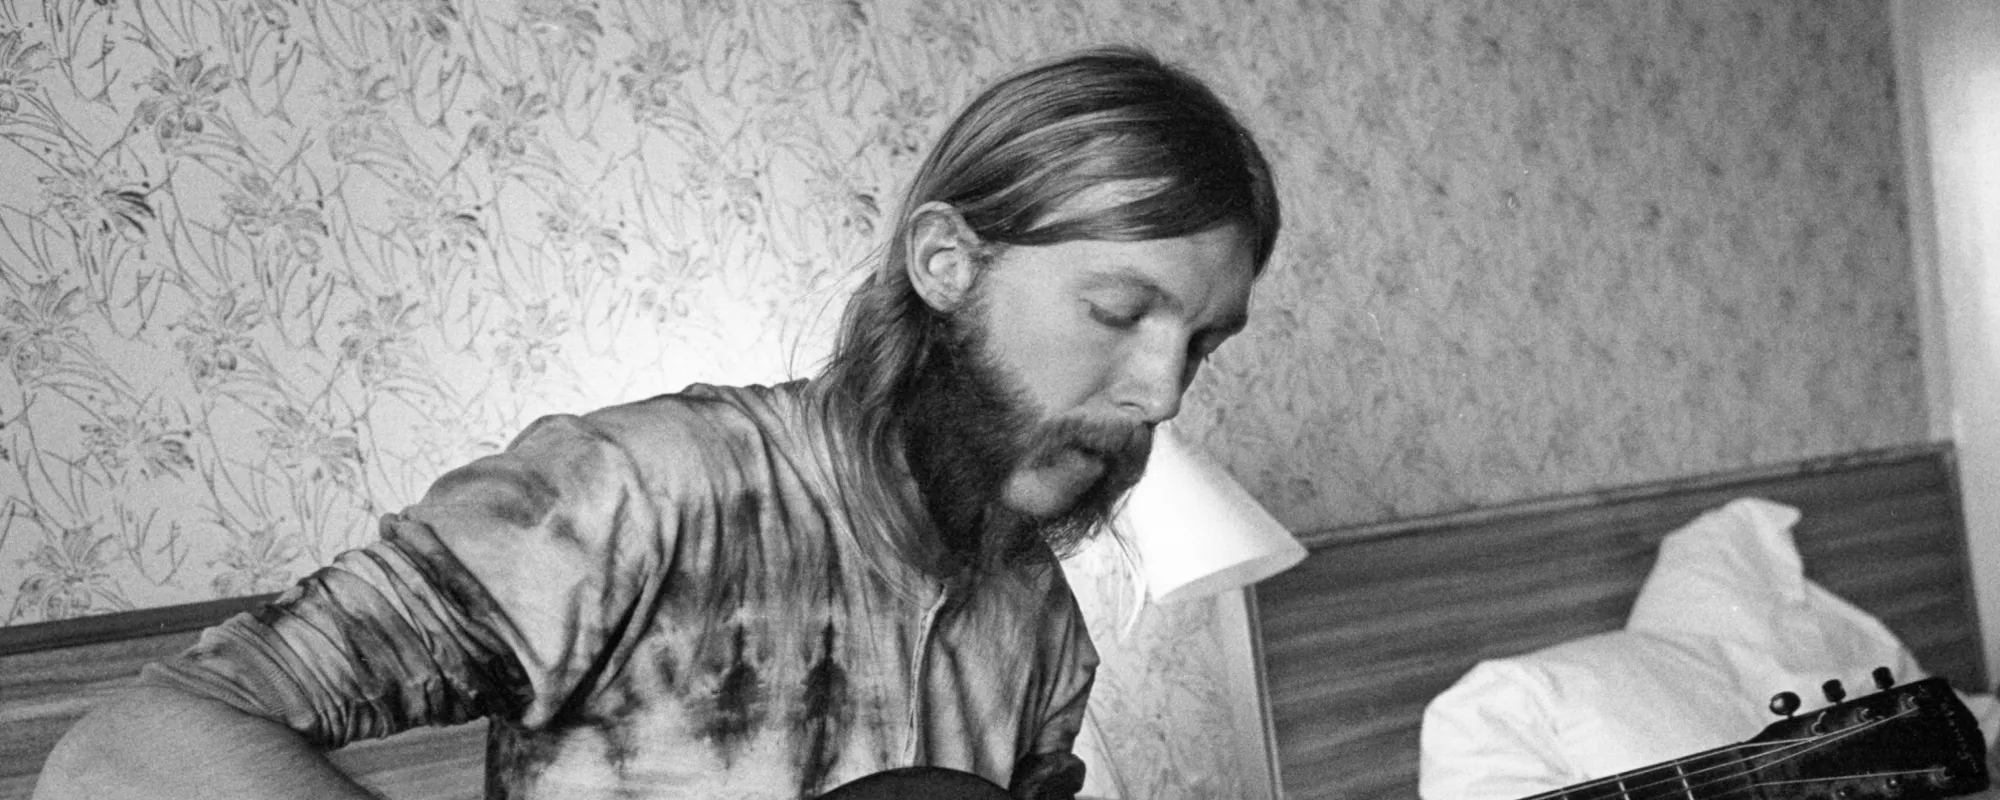 Remembering the Death and Legacy of Duane Allman